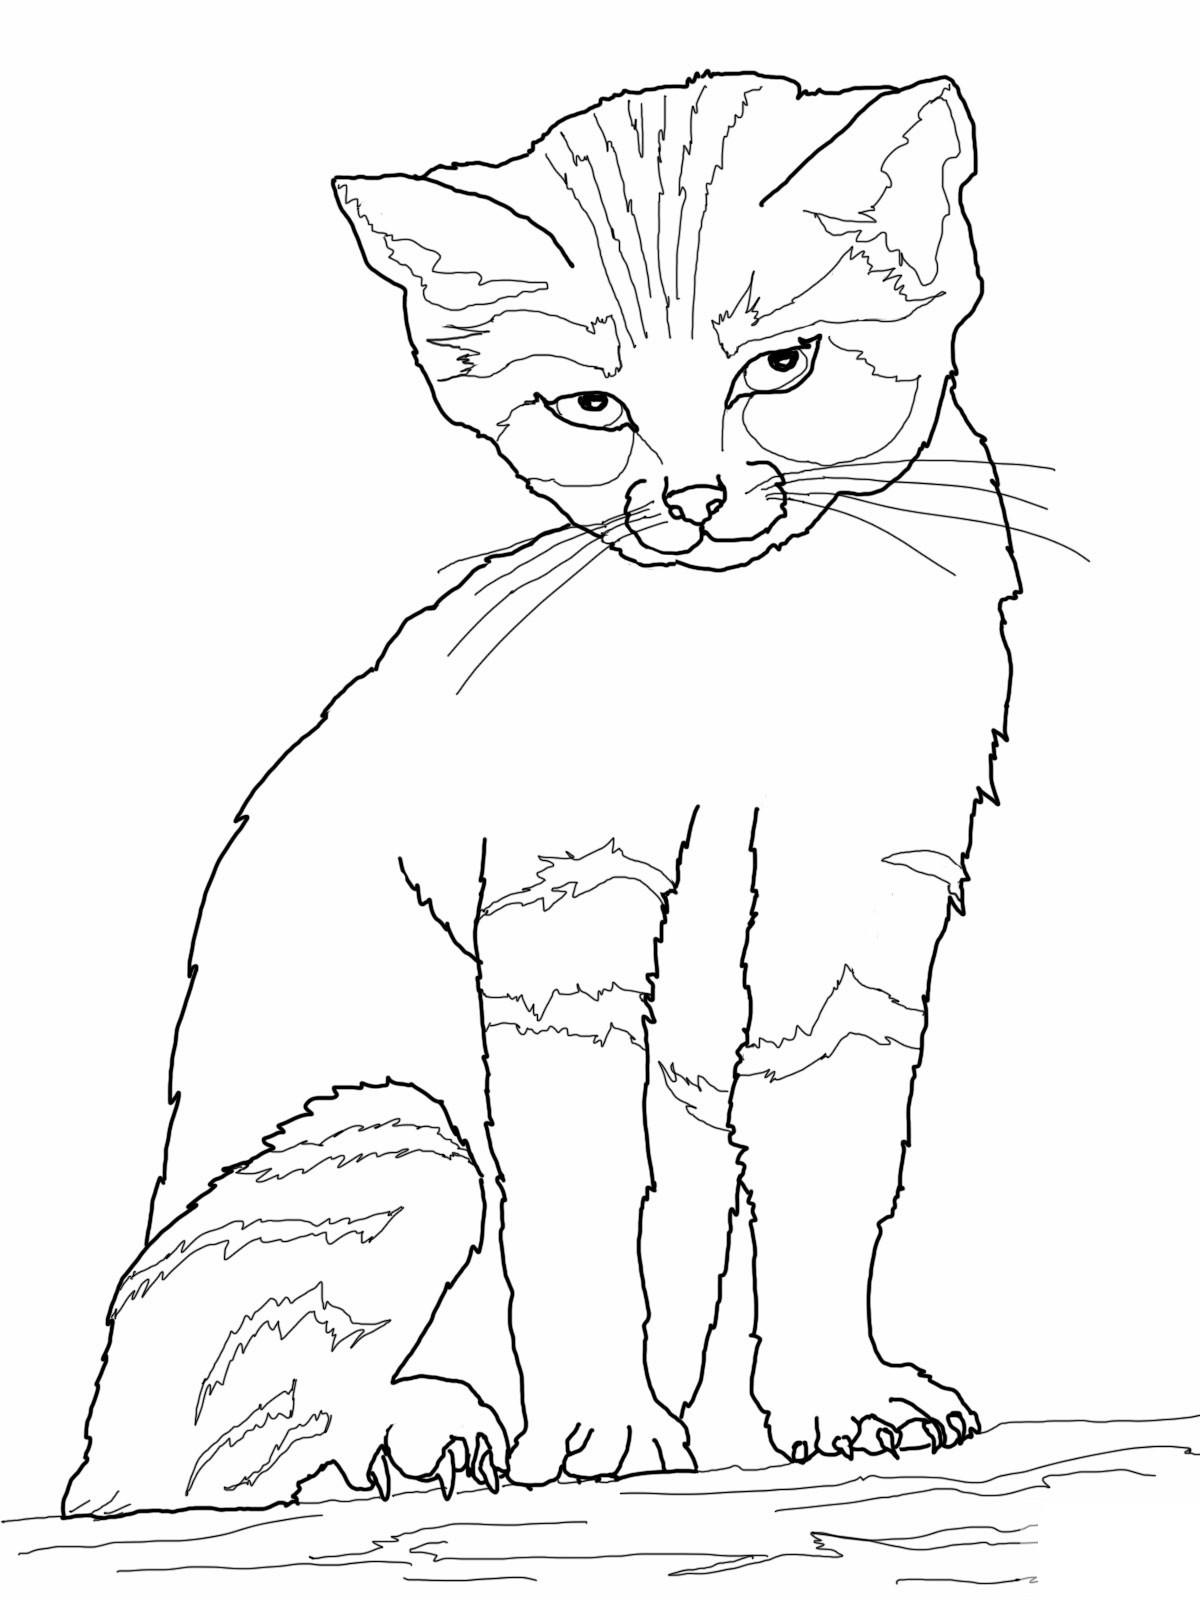 Printable Cat Coloring Pages For Kids
 1000 images about cool coloring pages all ages on